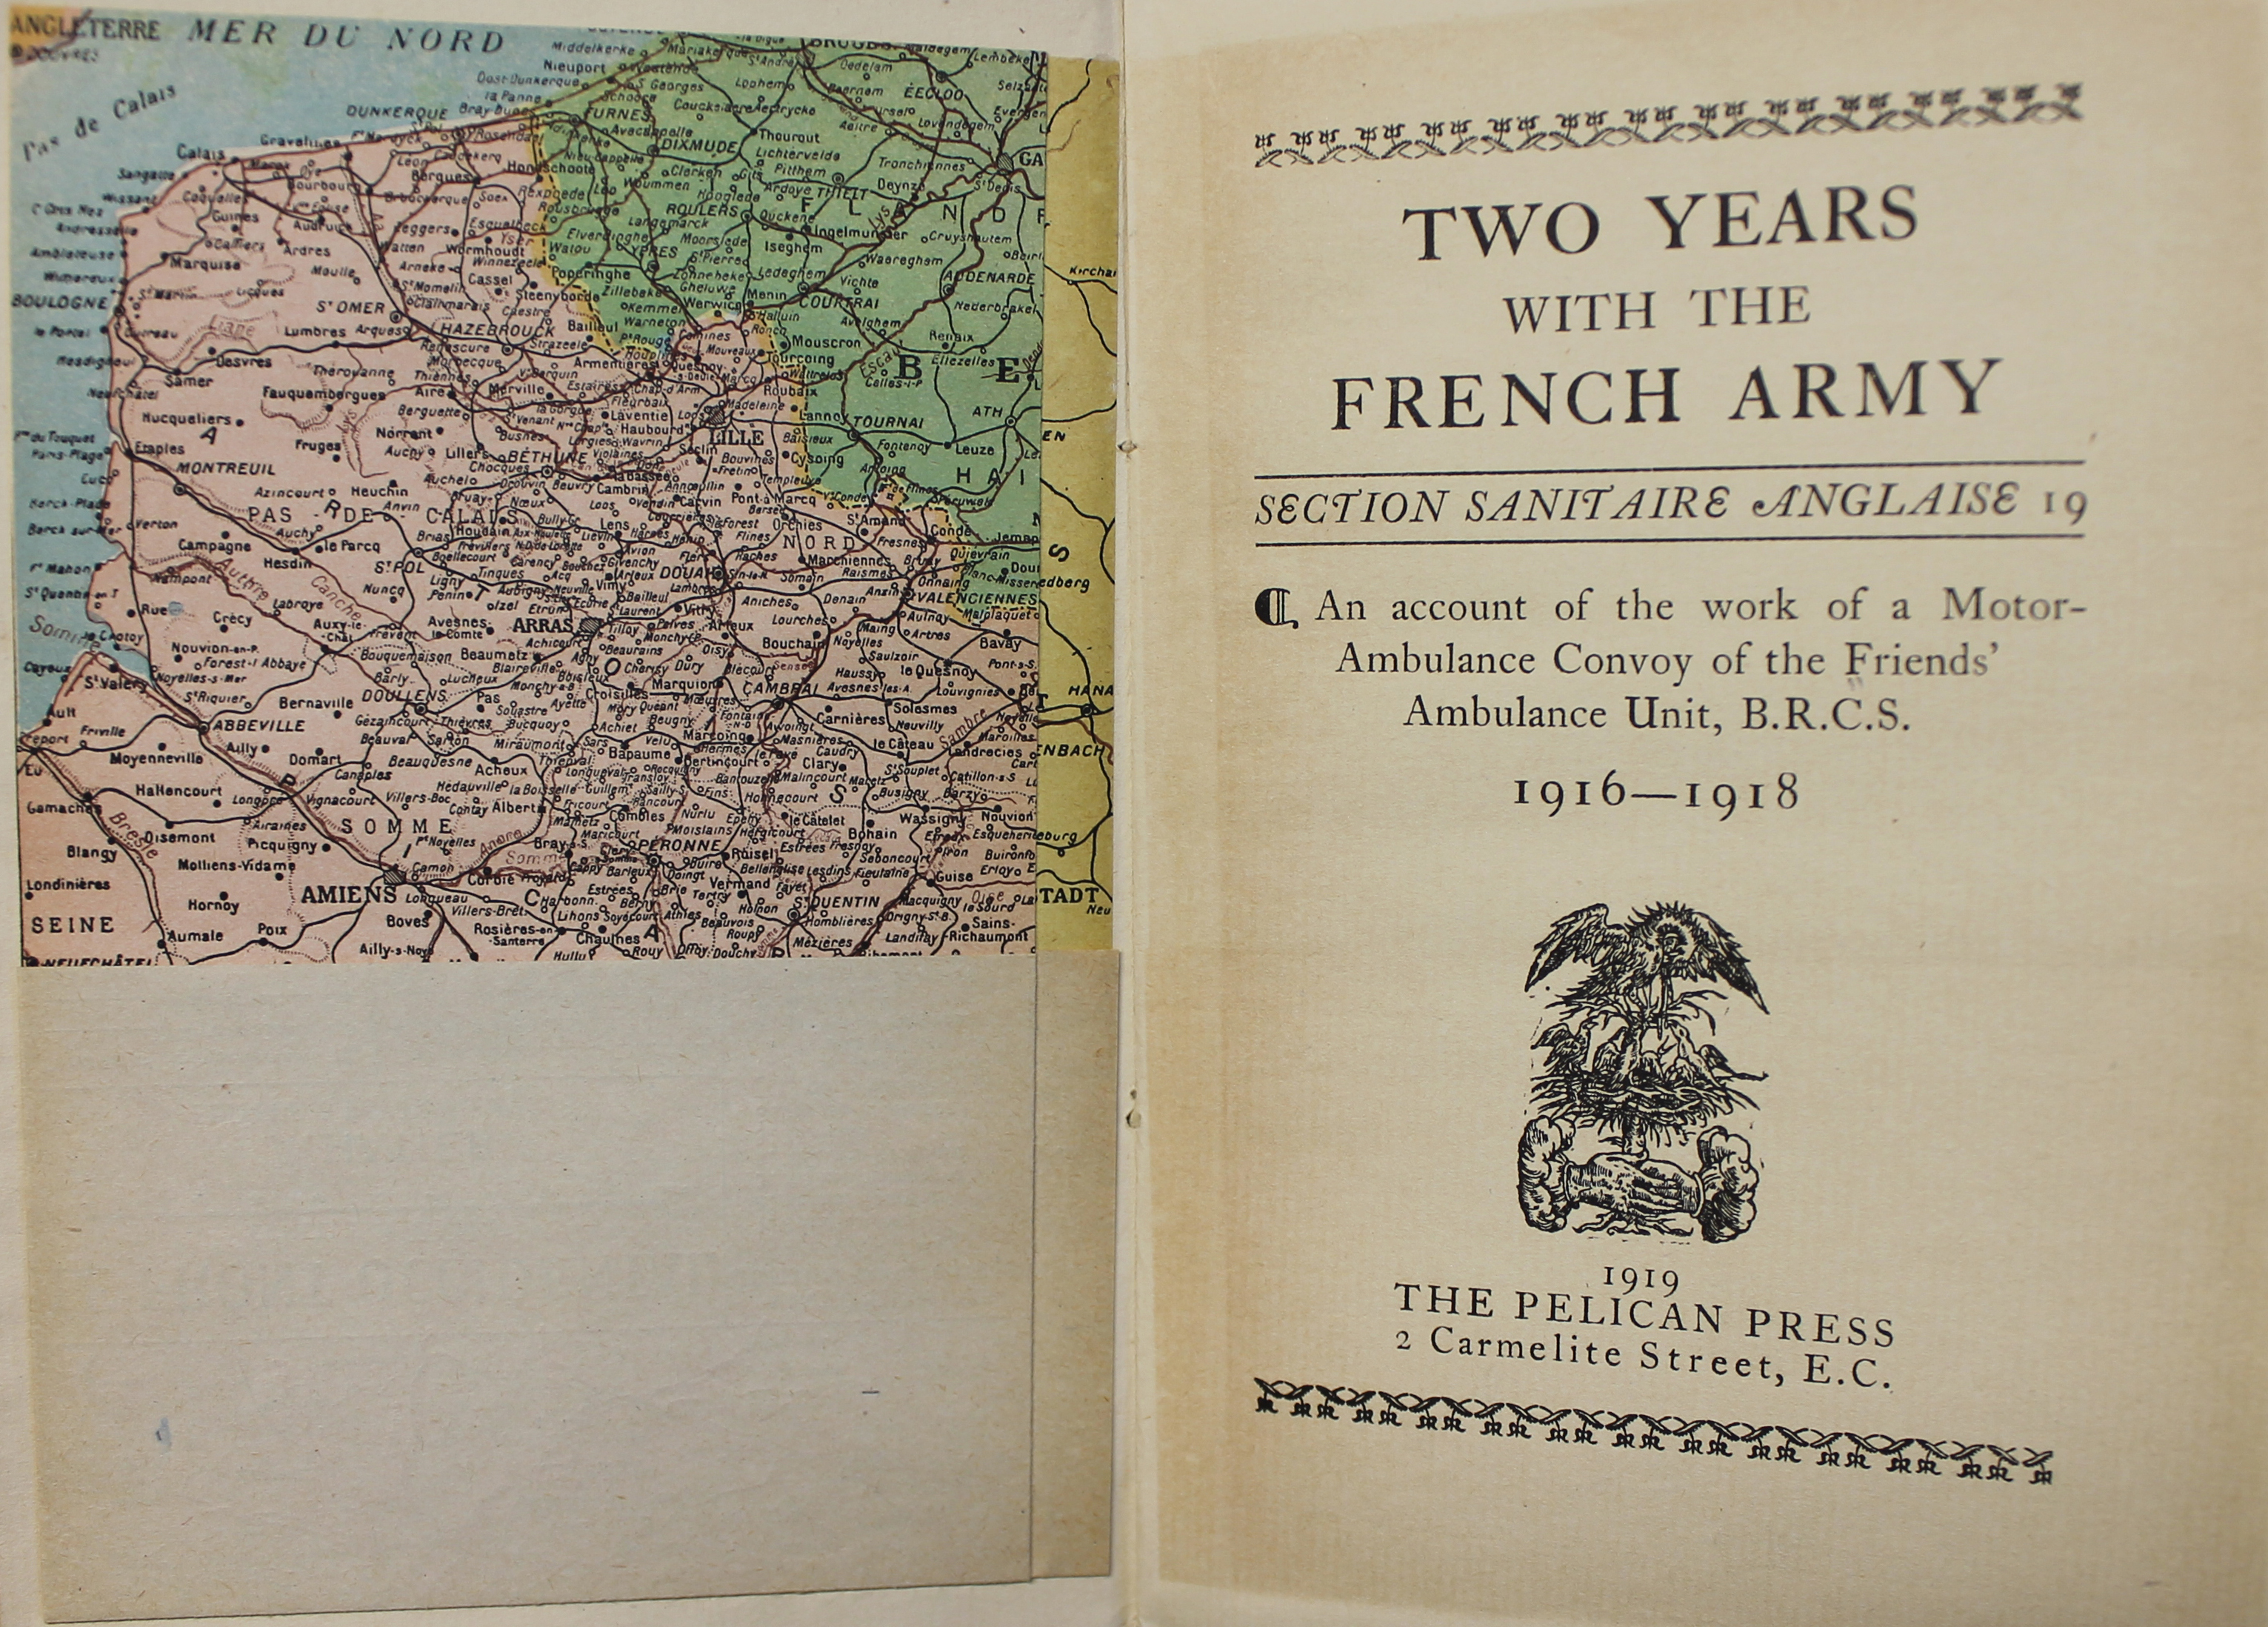 Inside title page of Two years with the French Army : Section Sanitaire Anglaise 19 